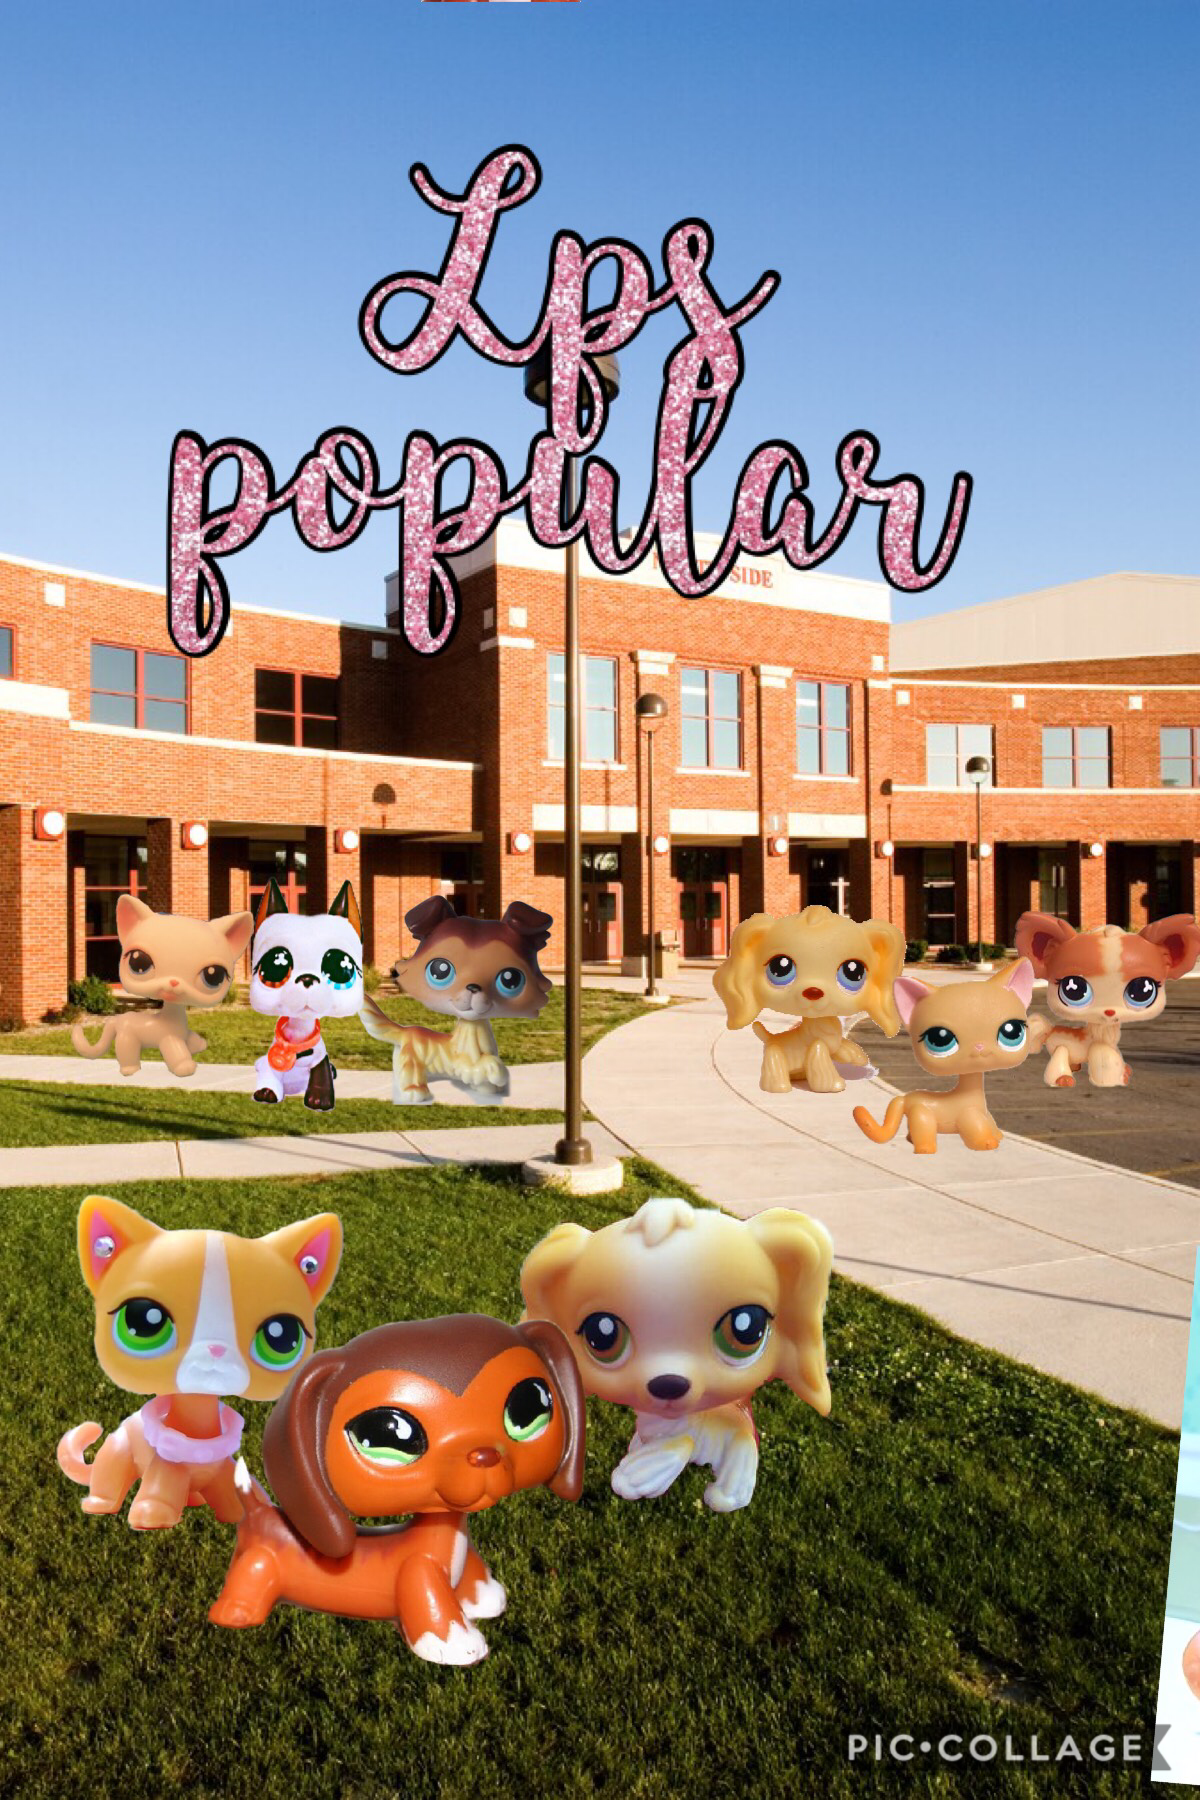 Who else watched??🐶🐱 #lpspopular #lps #sophiegtv